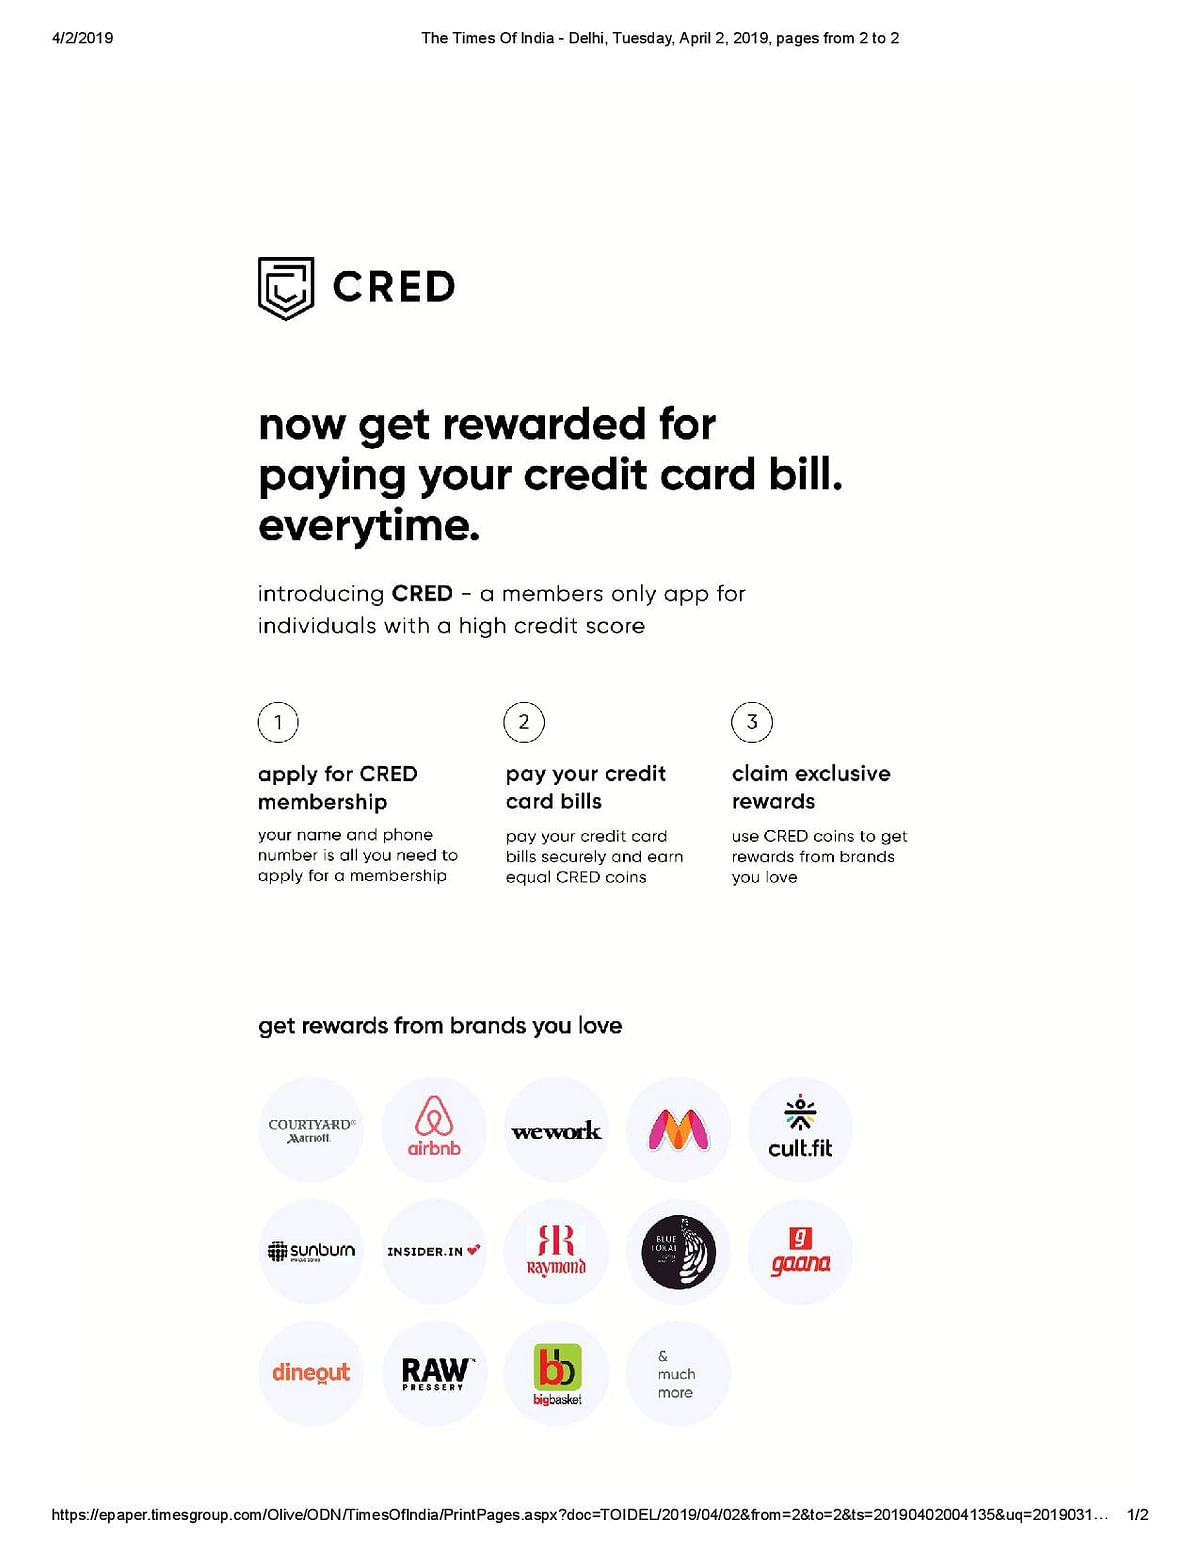 Cred's full page ad in TOI